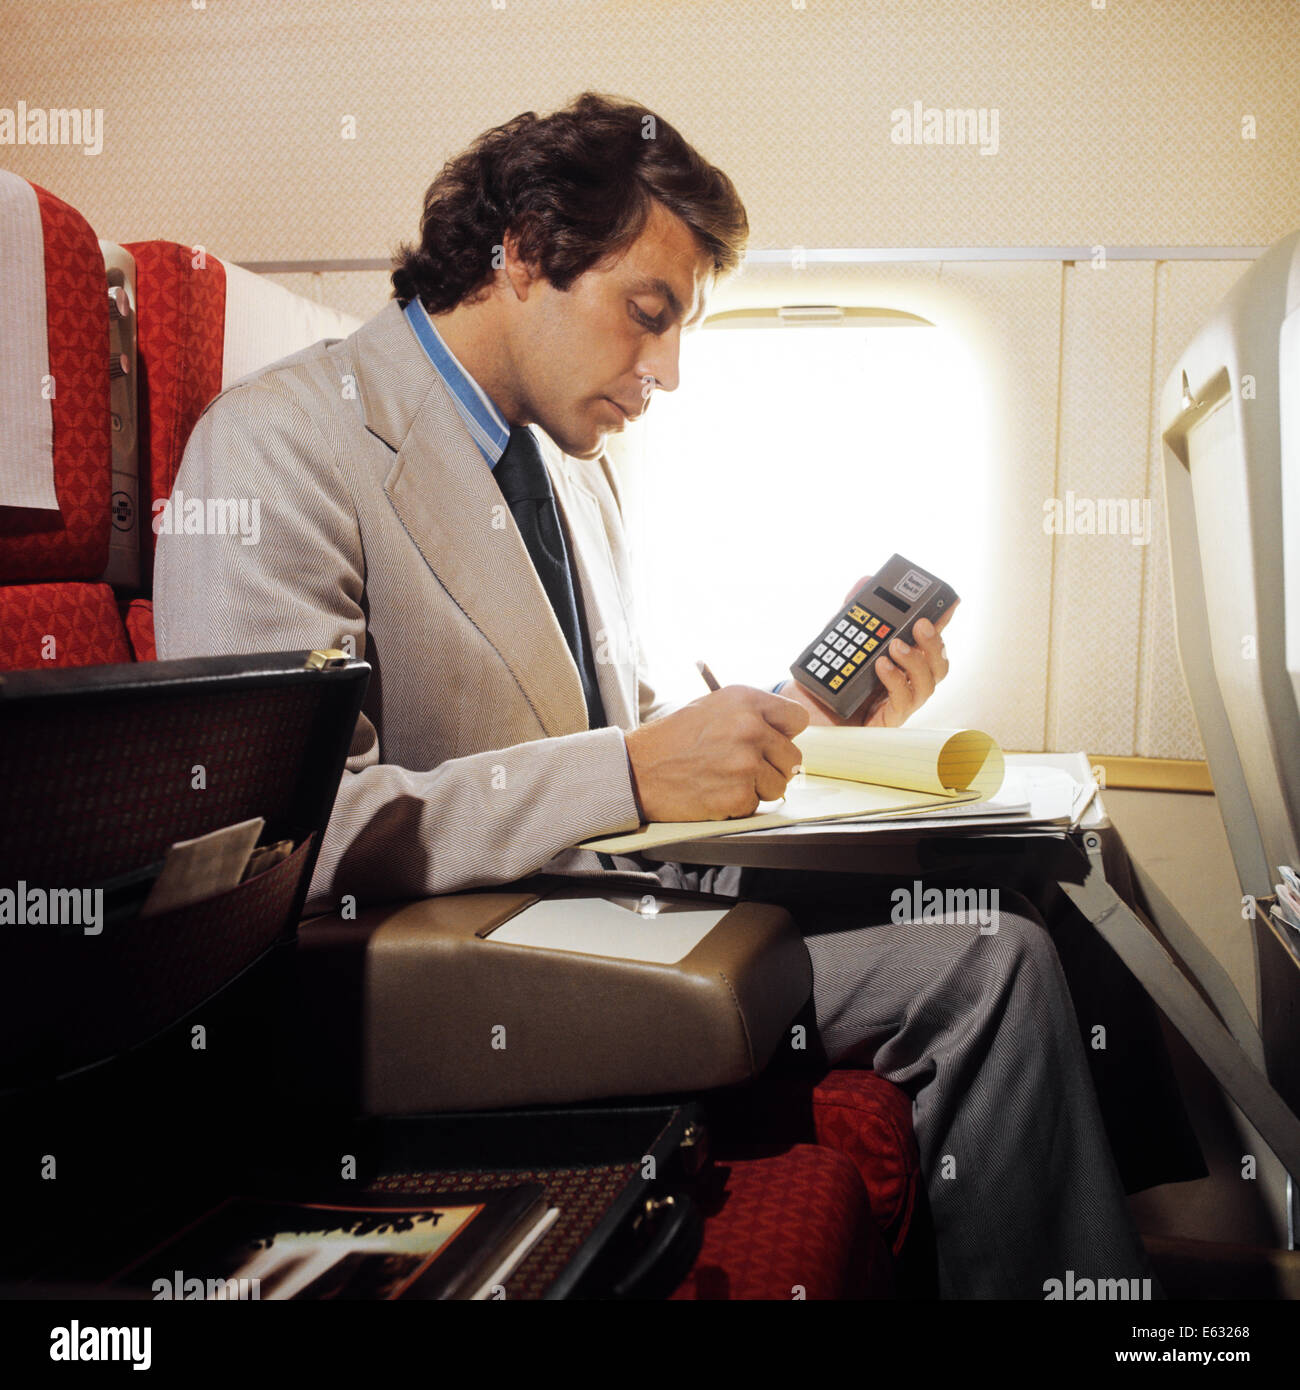 1970s 1980s BUSINESS MAN ABOARD PLANE WORKING ON PAPERS HOLDING CALCULATOR IN HAND Stock Photo